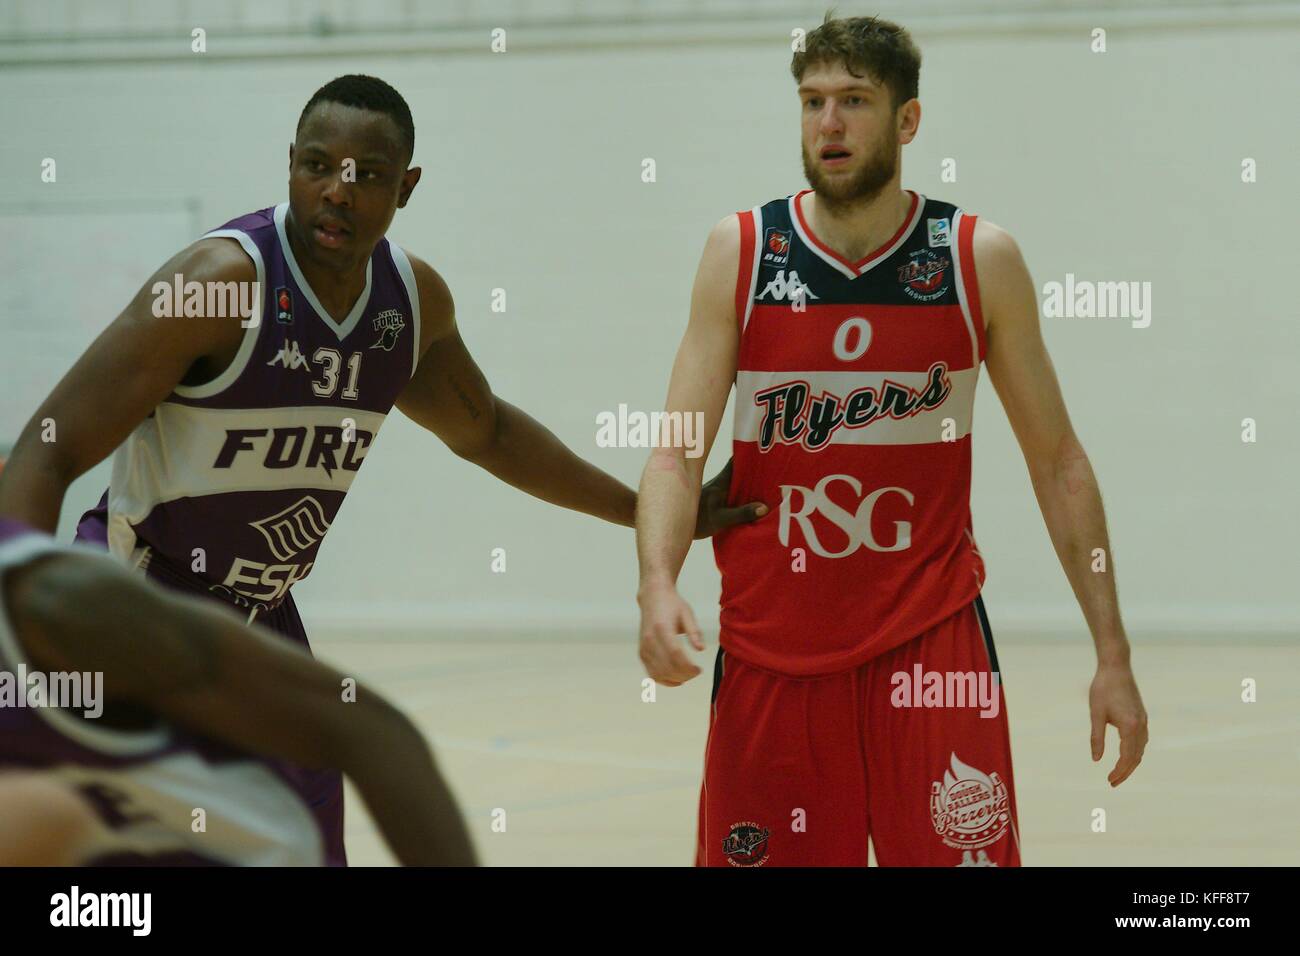 Leeds, England, 27 October 2017. Michael Vigor, right, of Bristol Flyers is marked by Allie Fullah of Leeds Force during their BBL Match at Carnegie Sports Hall. Credit: Colin Edwards/Alamy Live News. Stock Photo